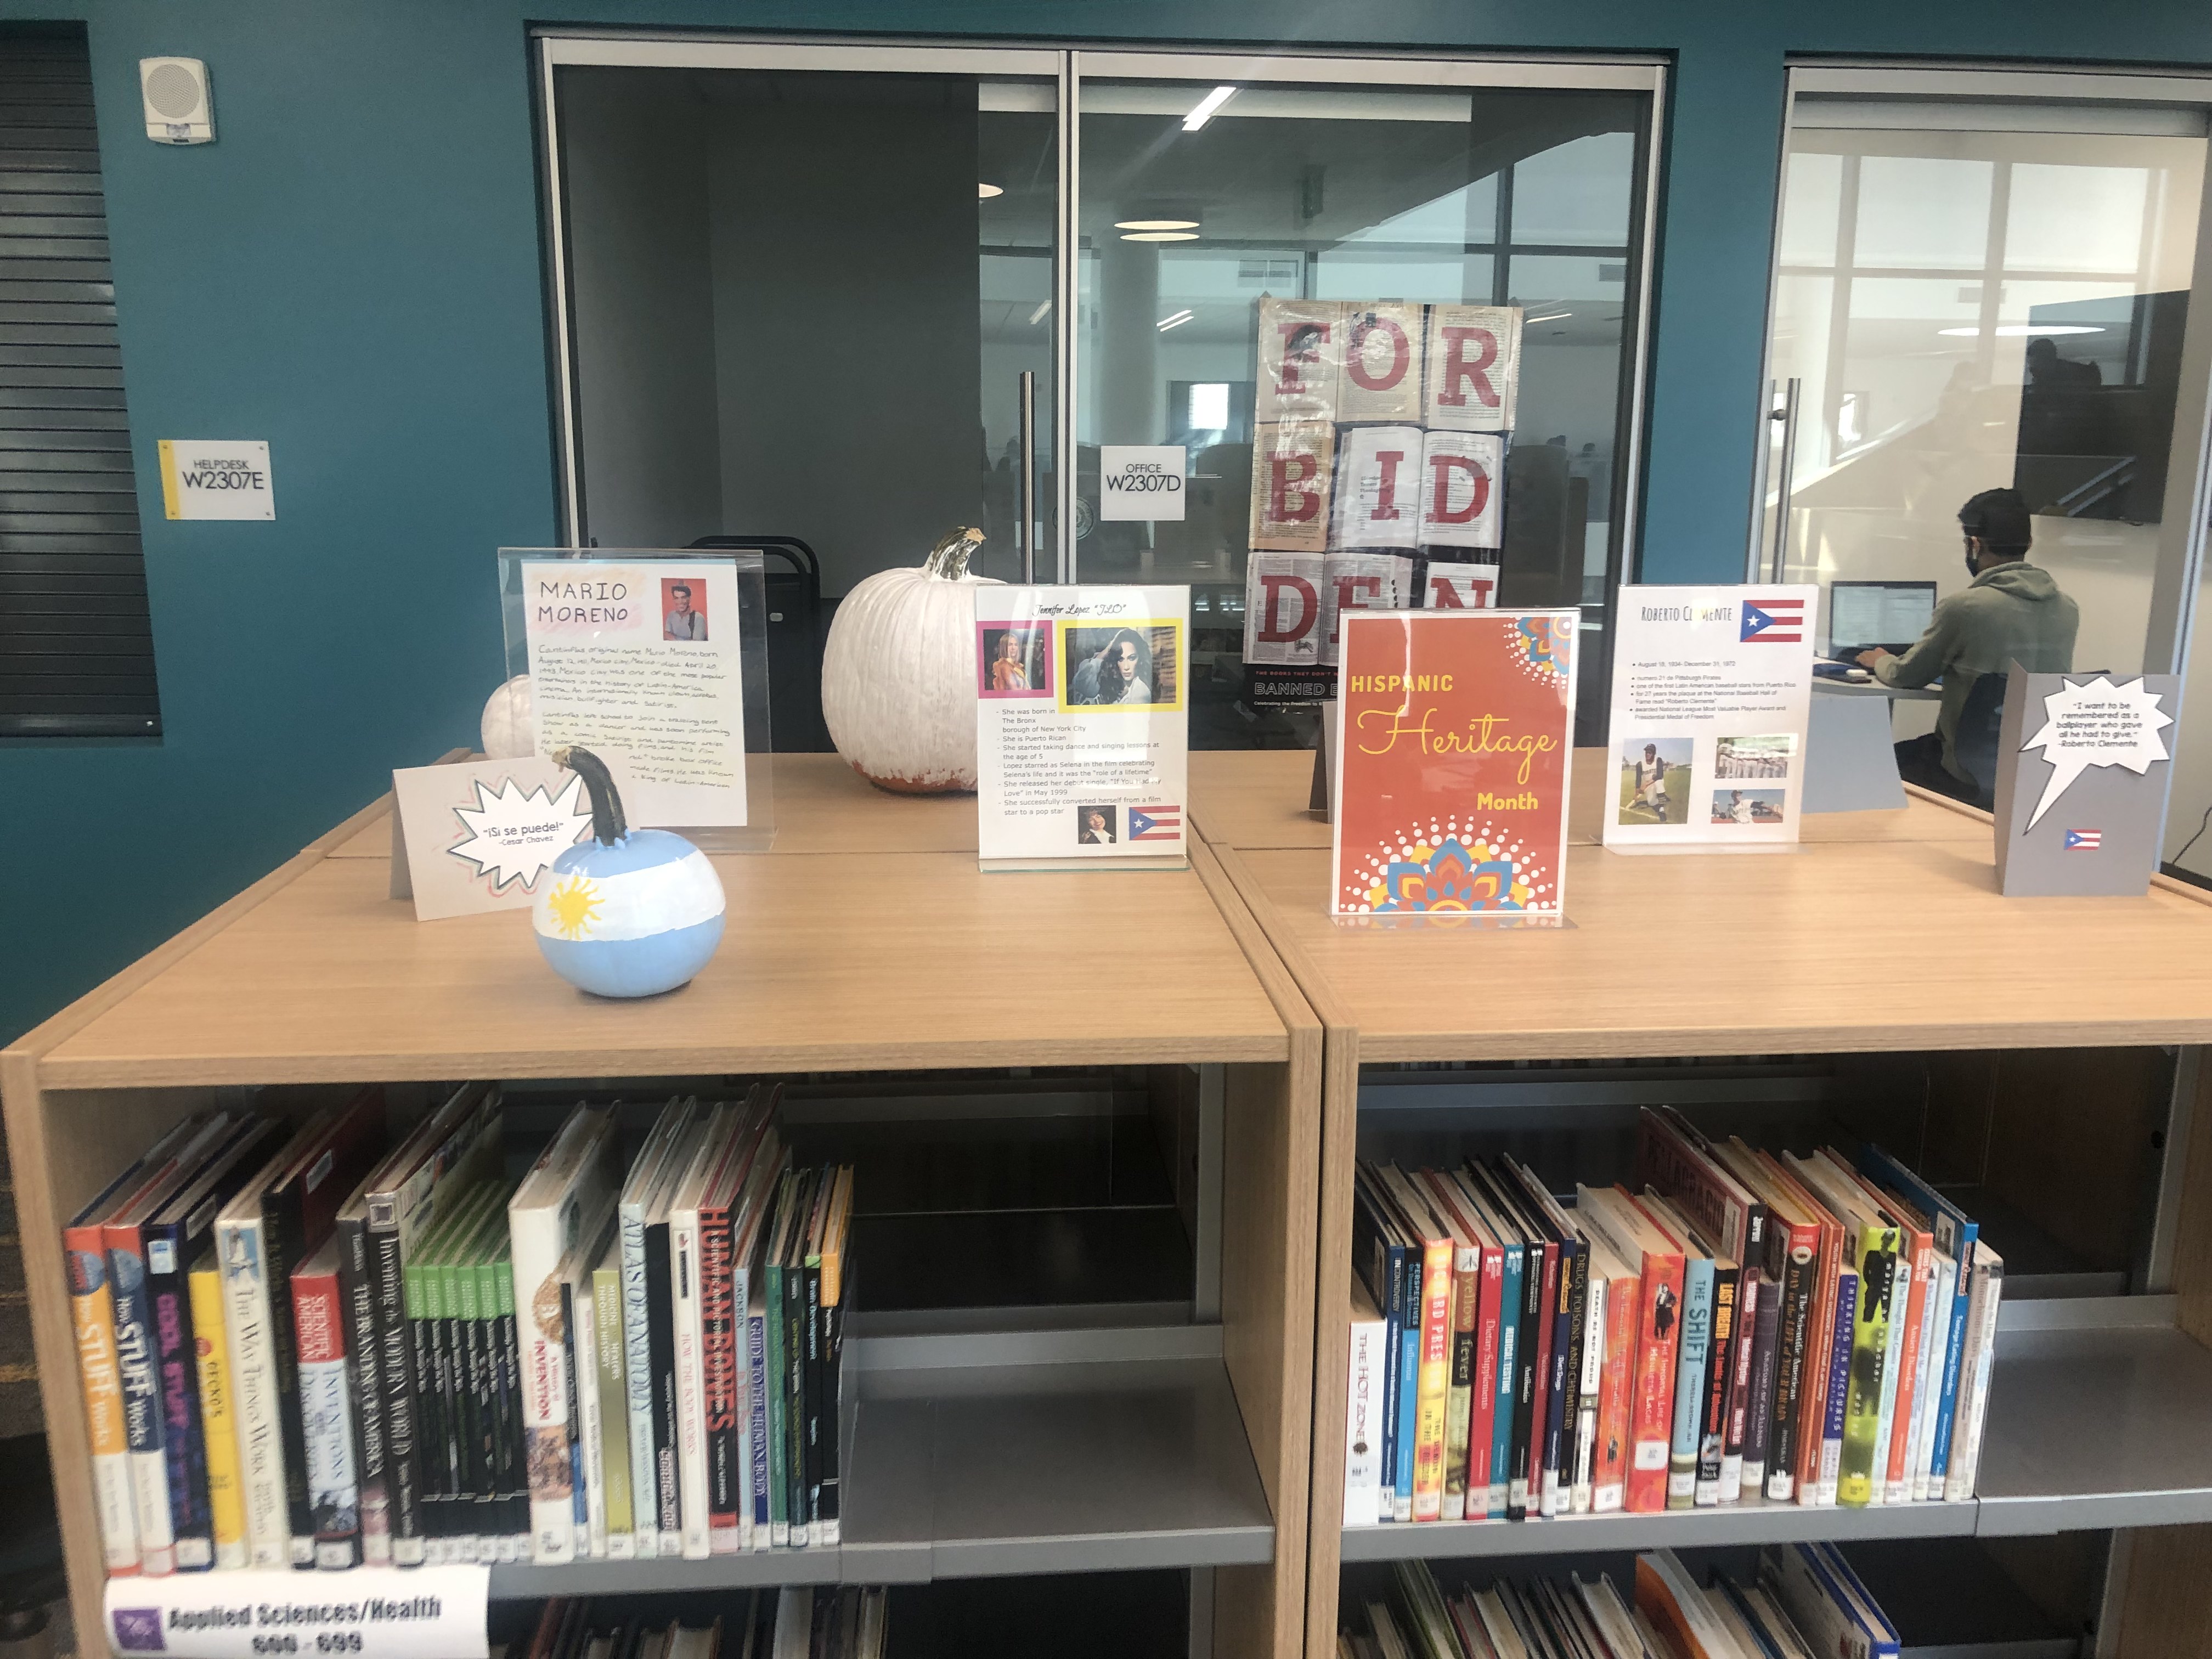 A display in the learning center